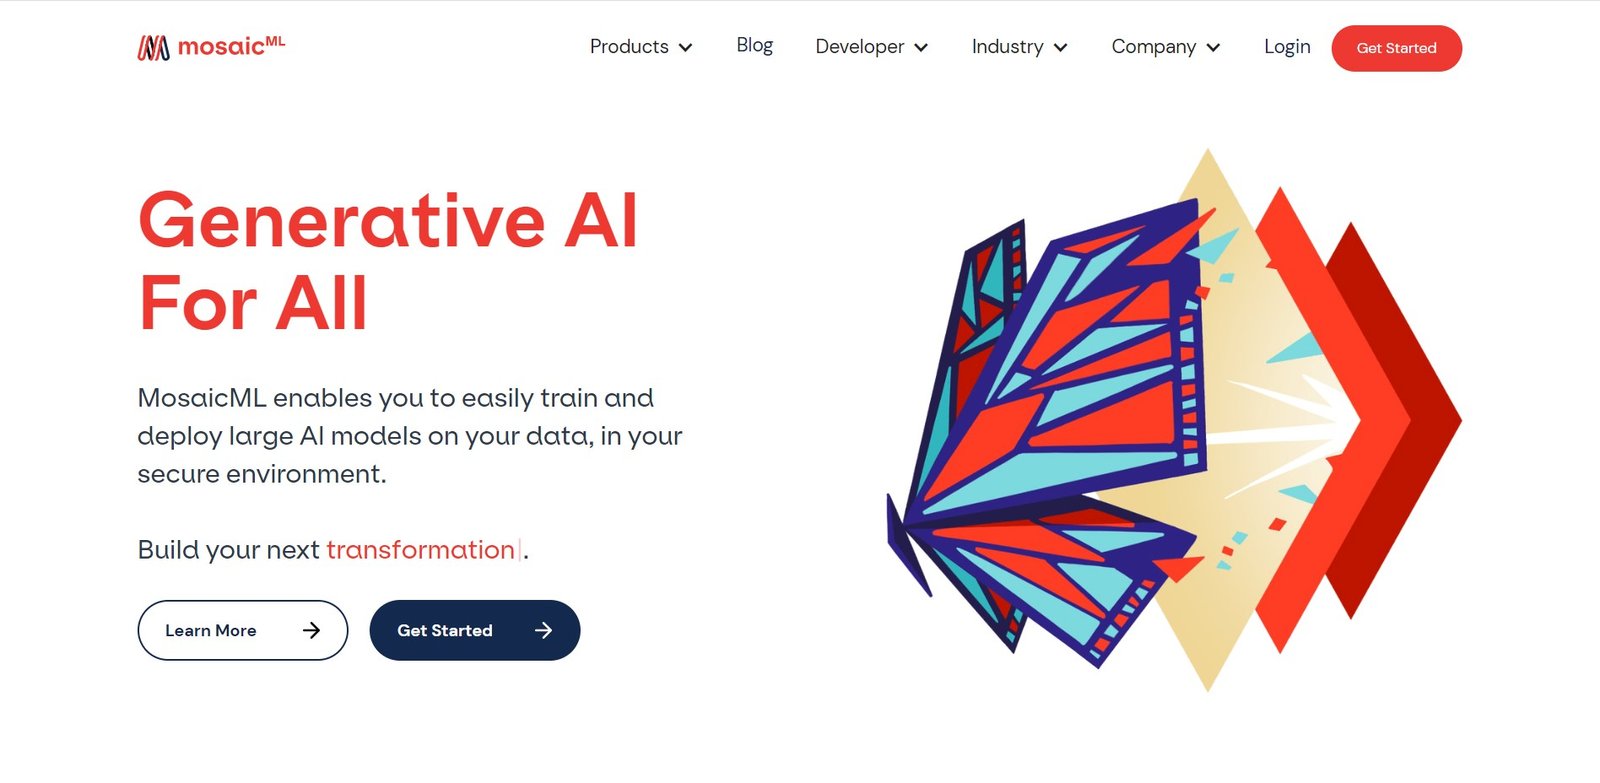 MosaicML is an AI platform that specializes in the training and deployment of large AI models on your data